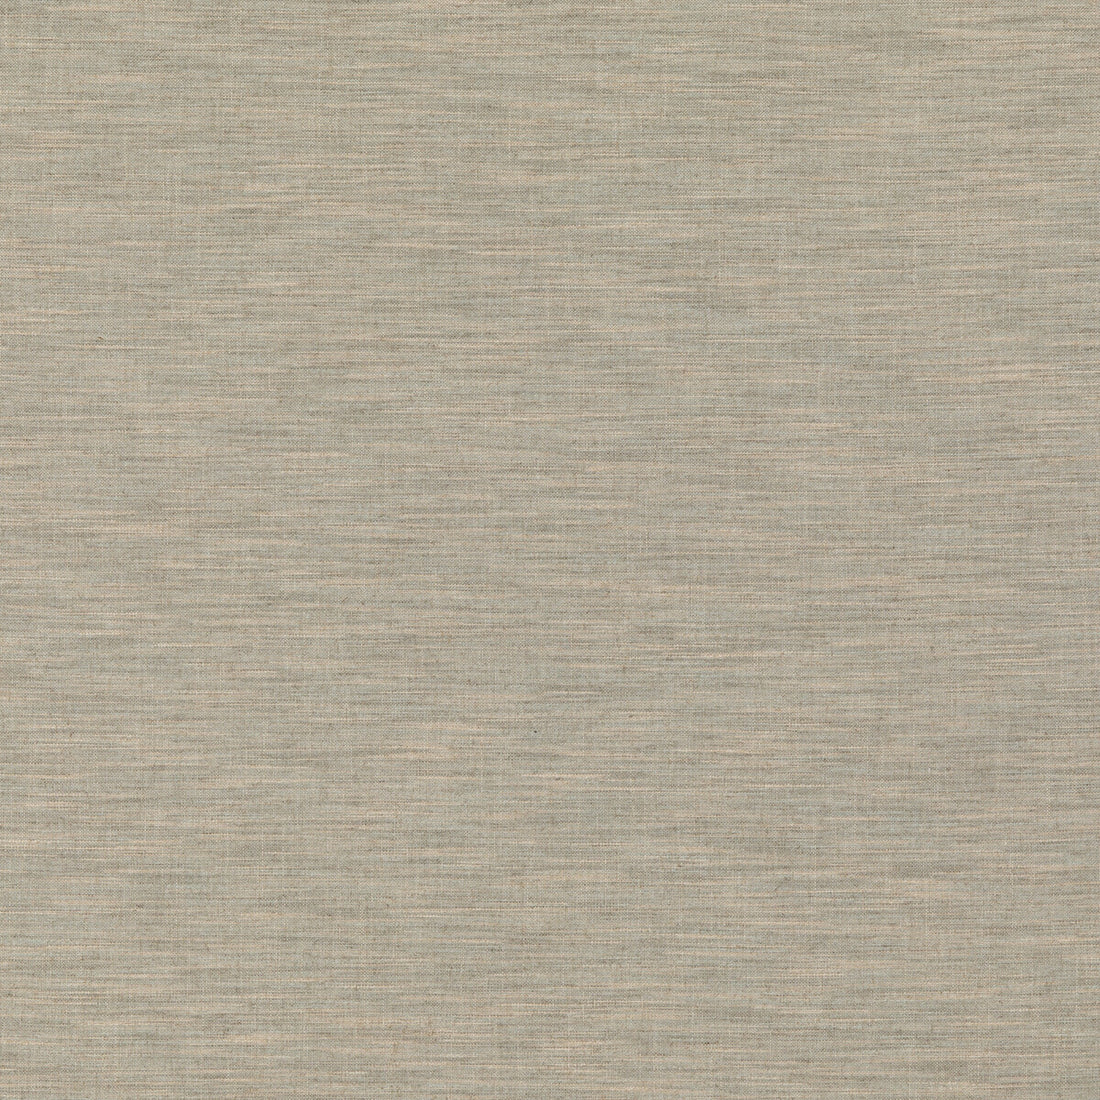 Quinton fabric in mineral color - pattern BF10887.705.0 - by G P &amp; J Baker in the Essential Colours II collection